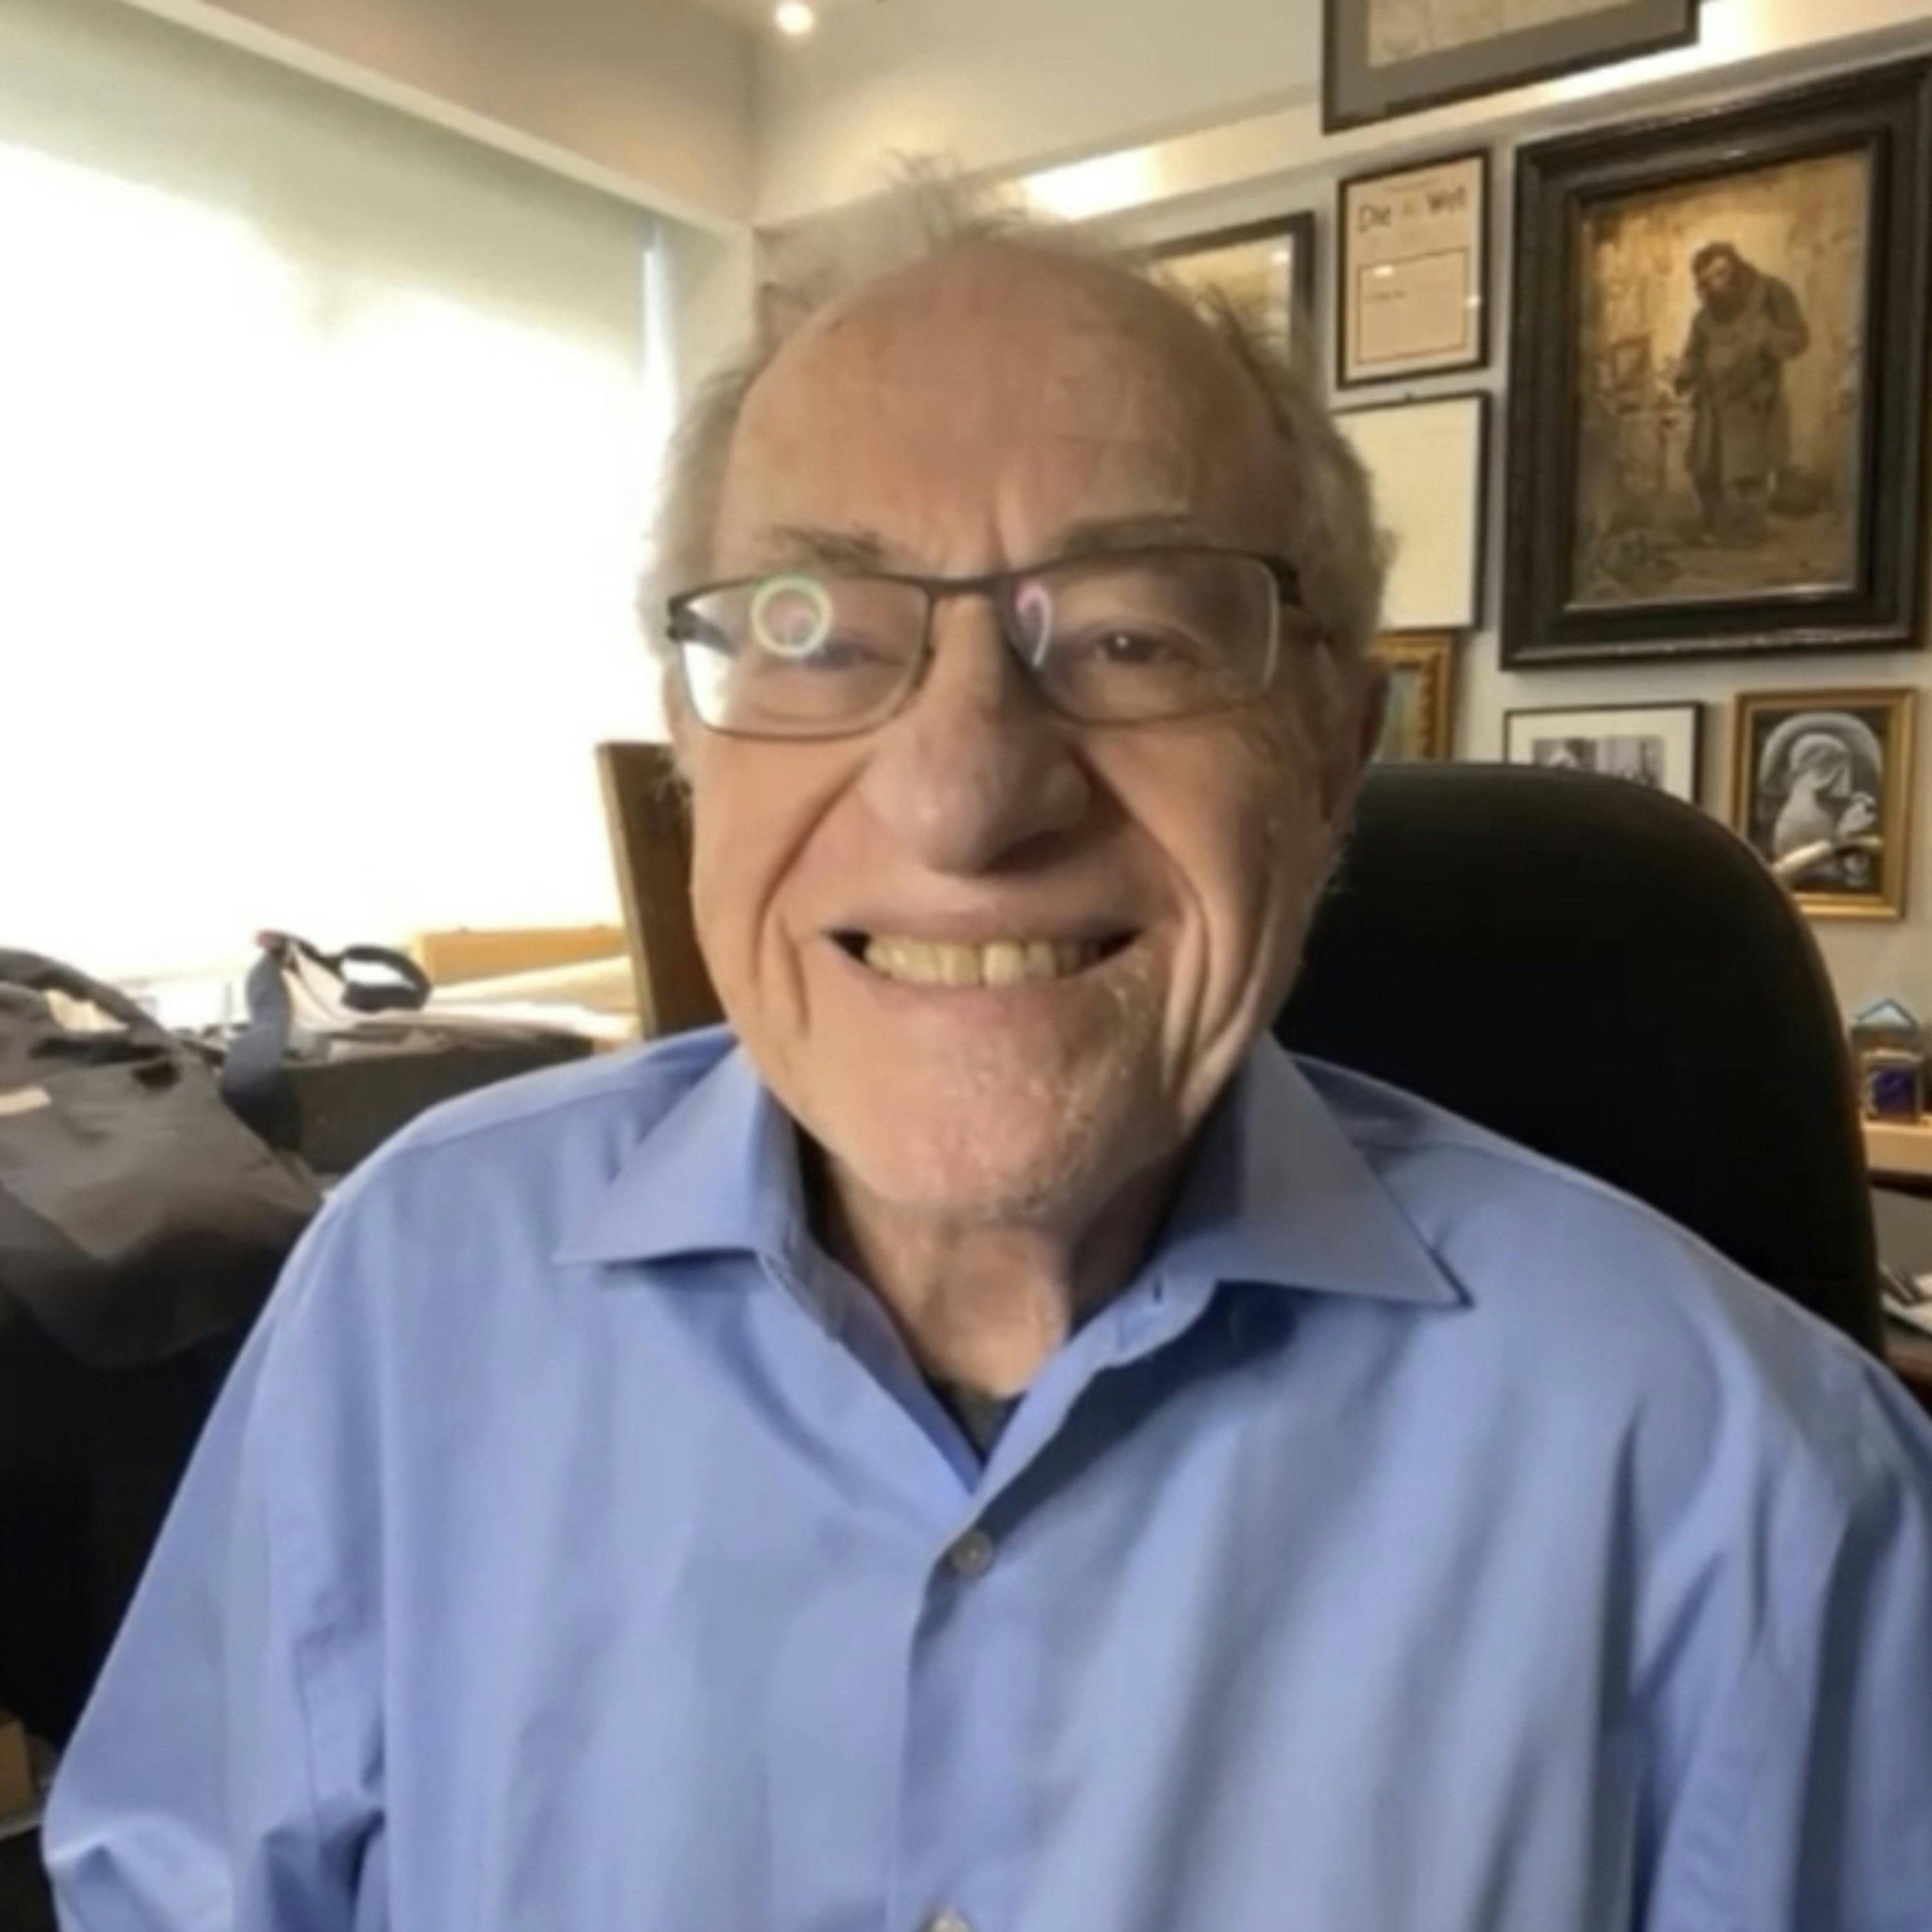 77: Professor Alan Dershowitz: “Free speech for me, but not for thee” and his BBC’s cancellation